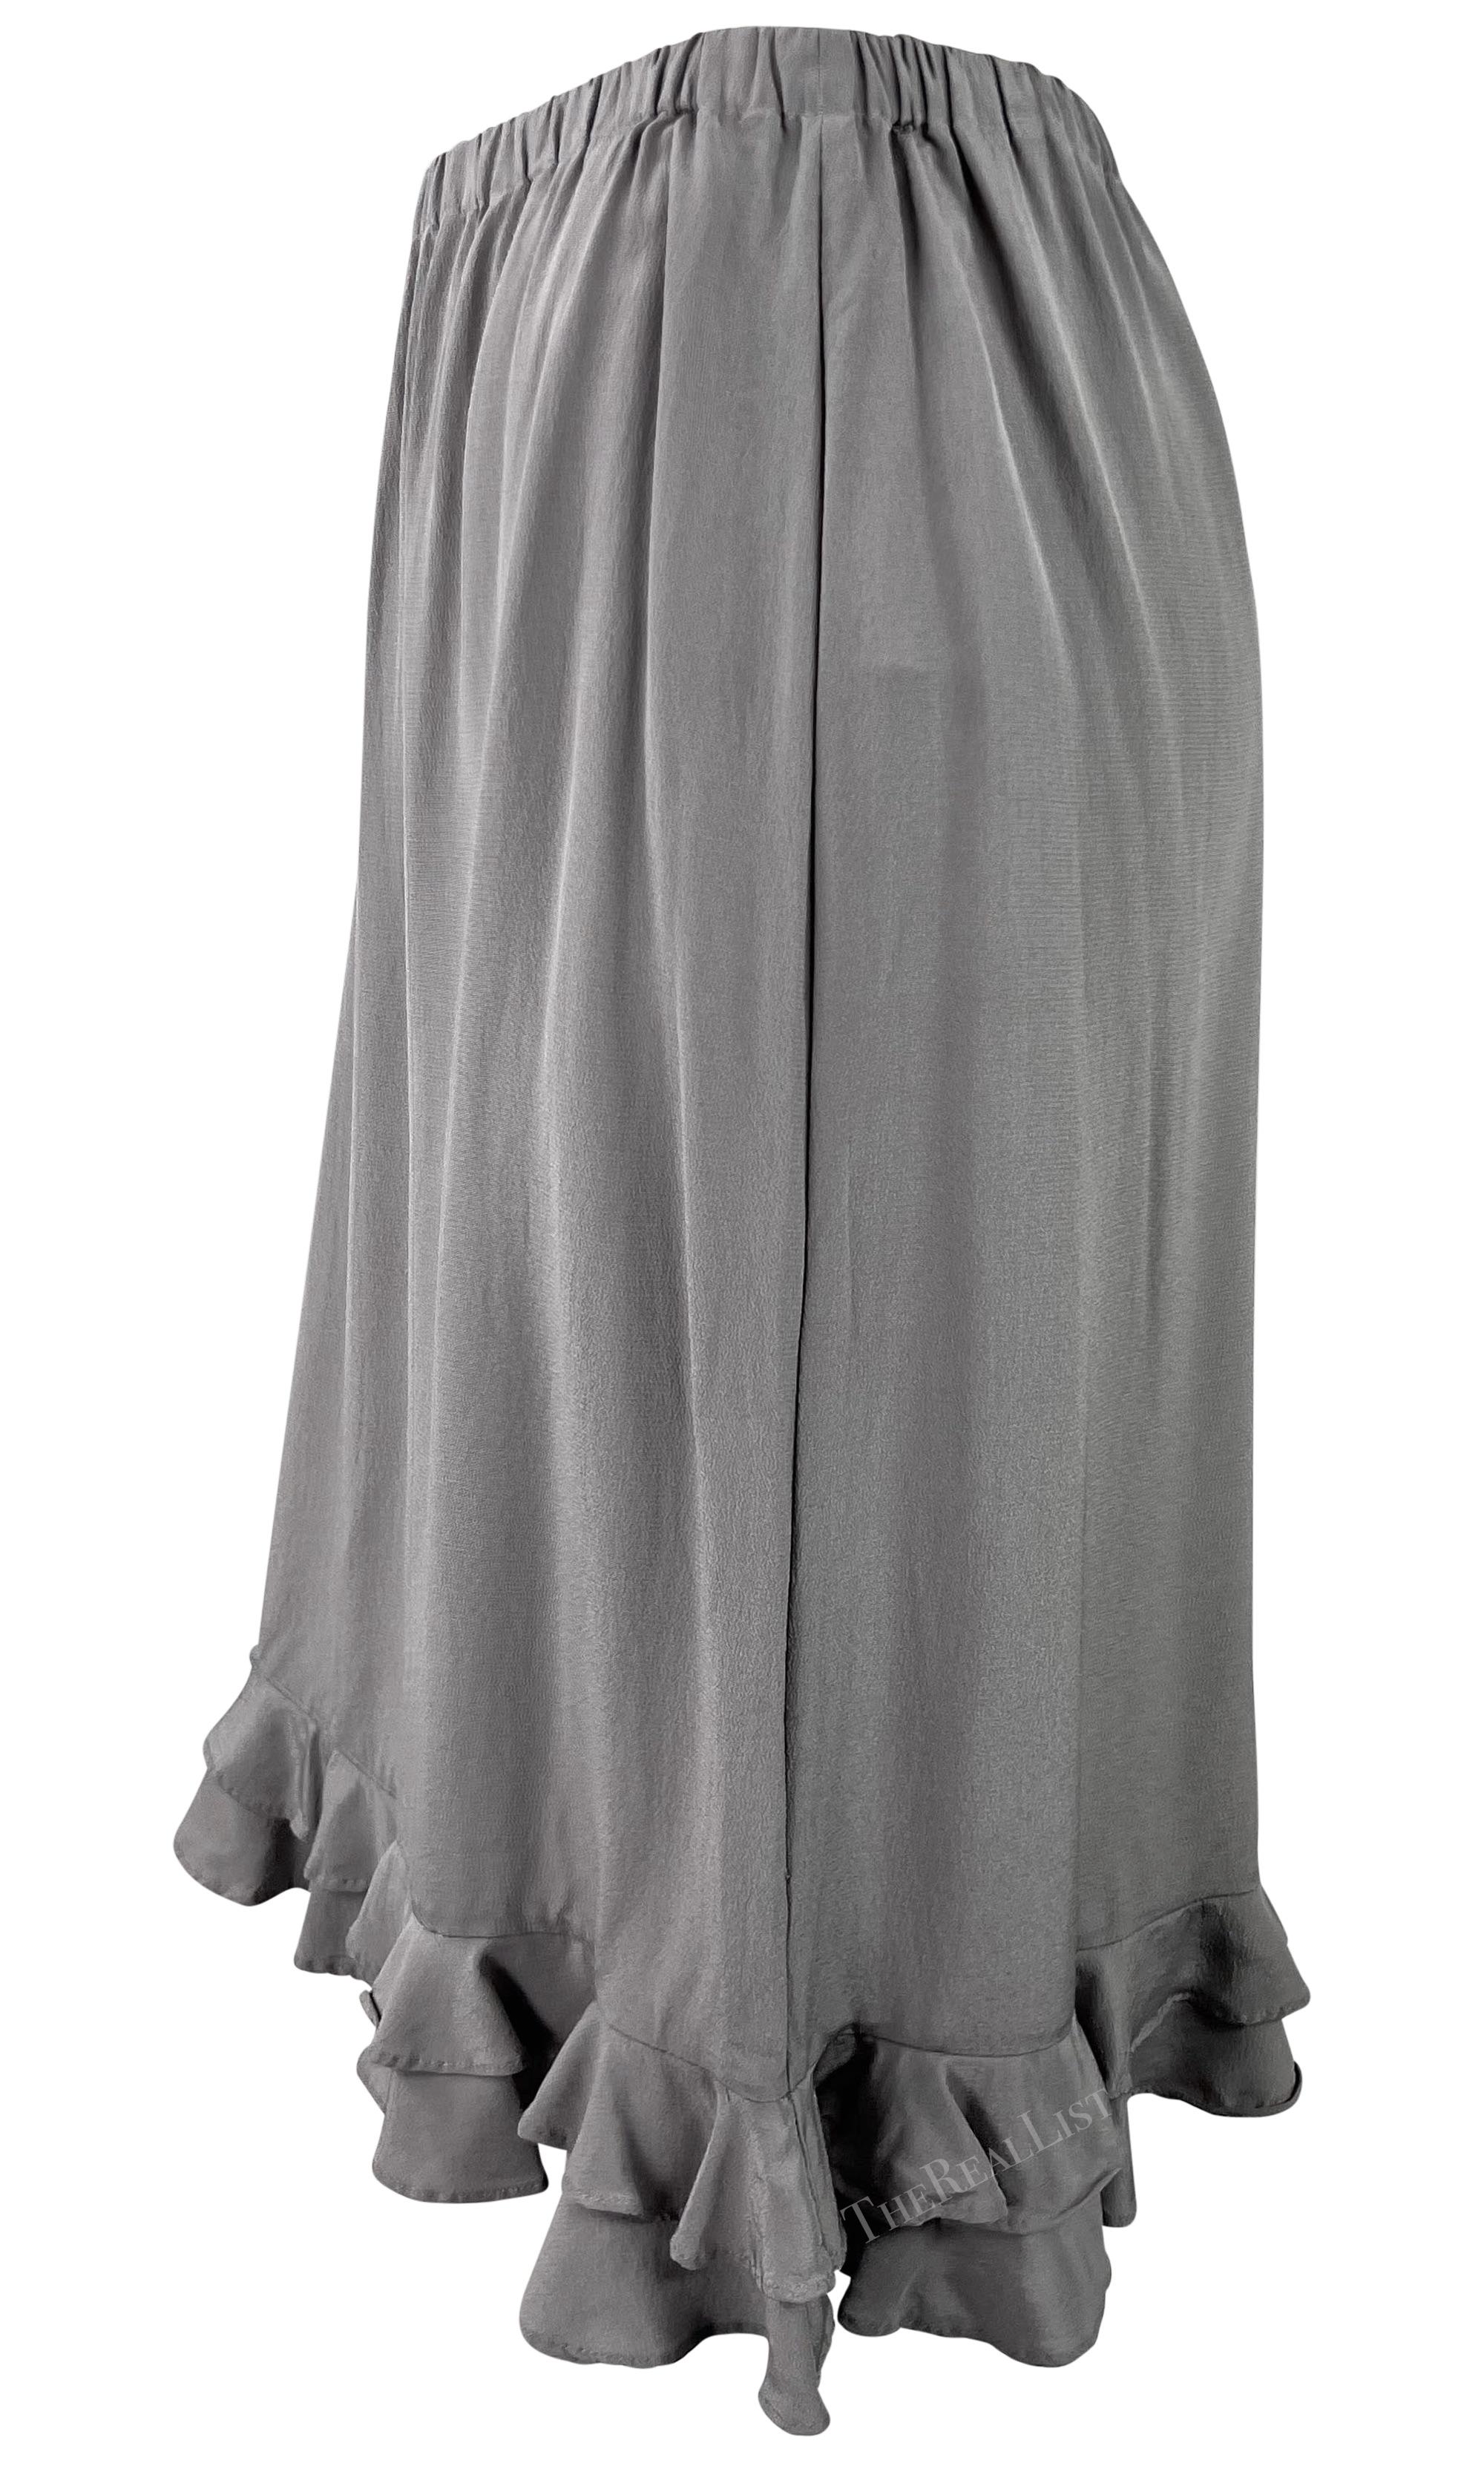 S/S 1999 Gucci by Tom Ford Ruffled Grey Silk Long Sleeve Top Skirt Set For Sale 6